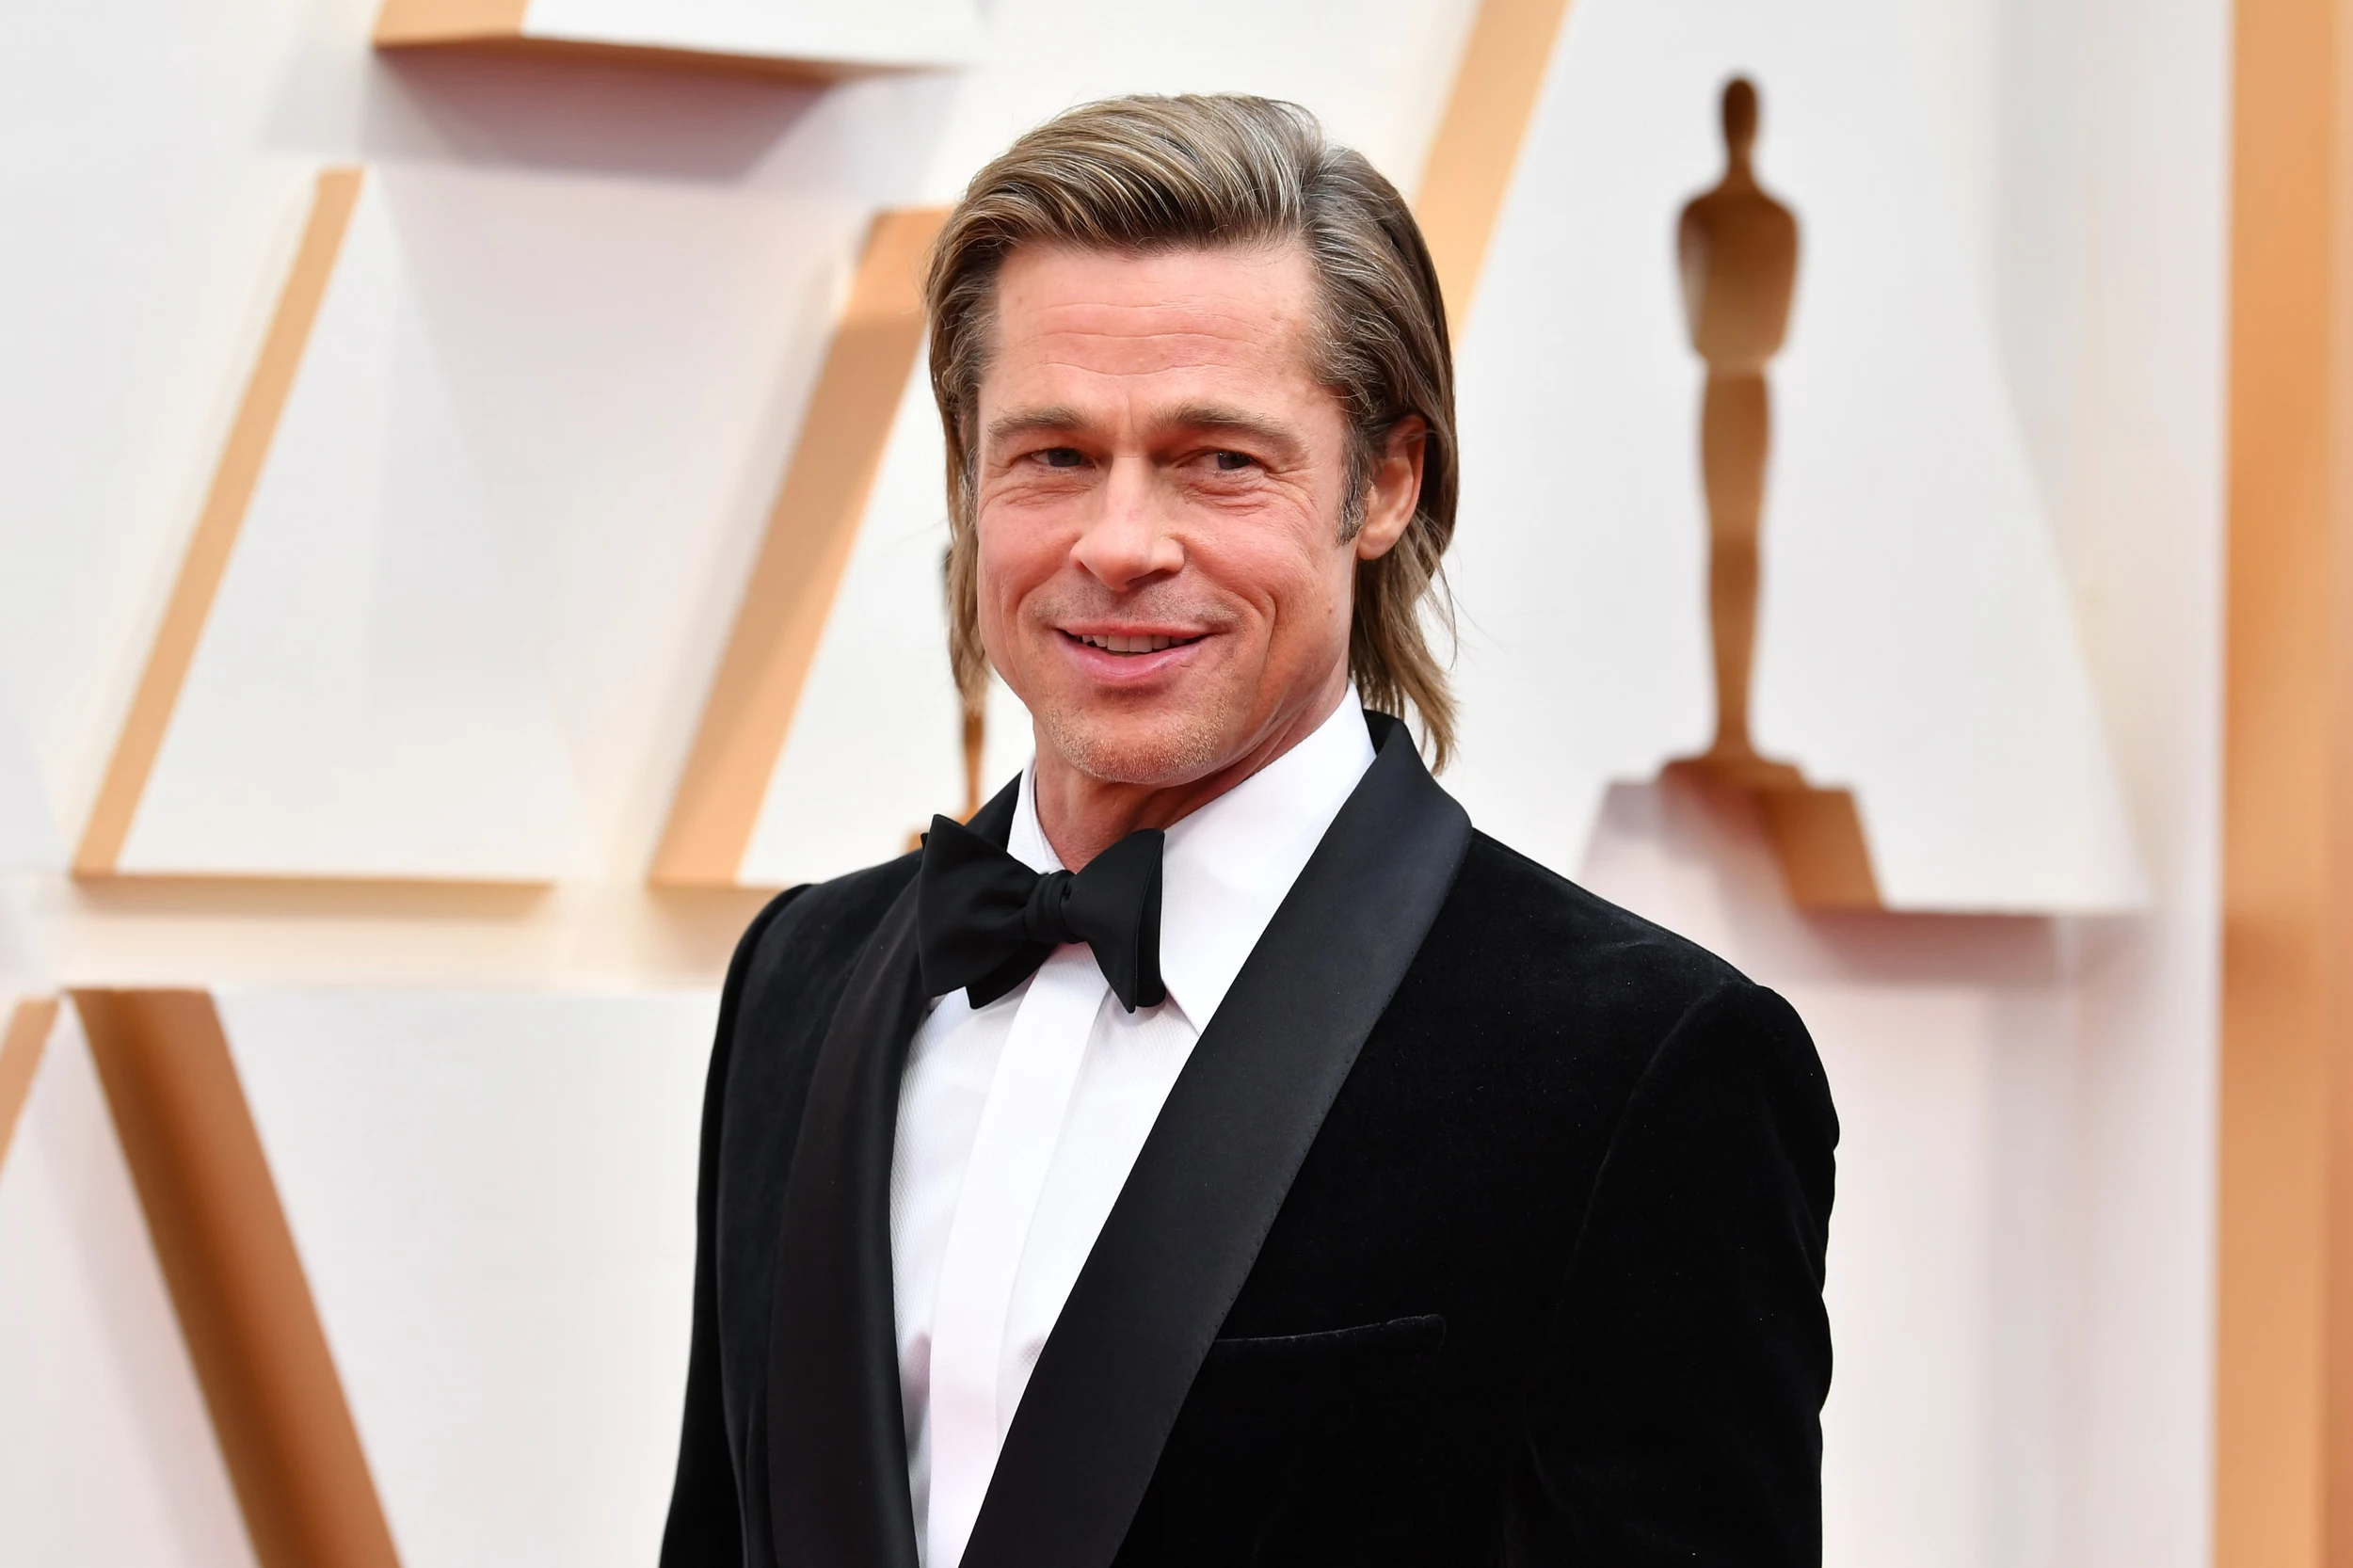 Brad Pitt is the Face of Brioni Fall Winter 2020 Collection